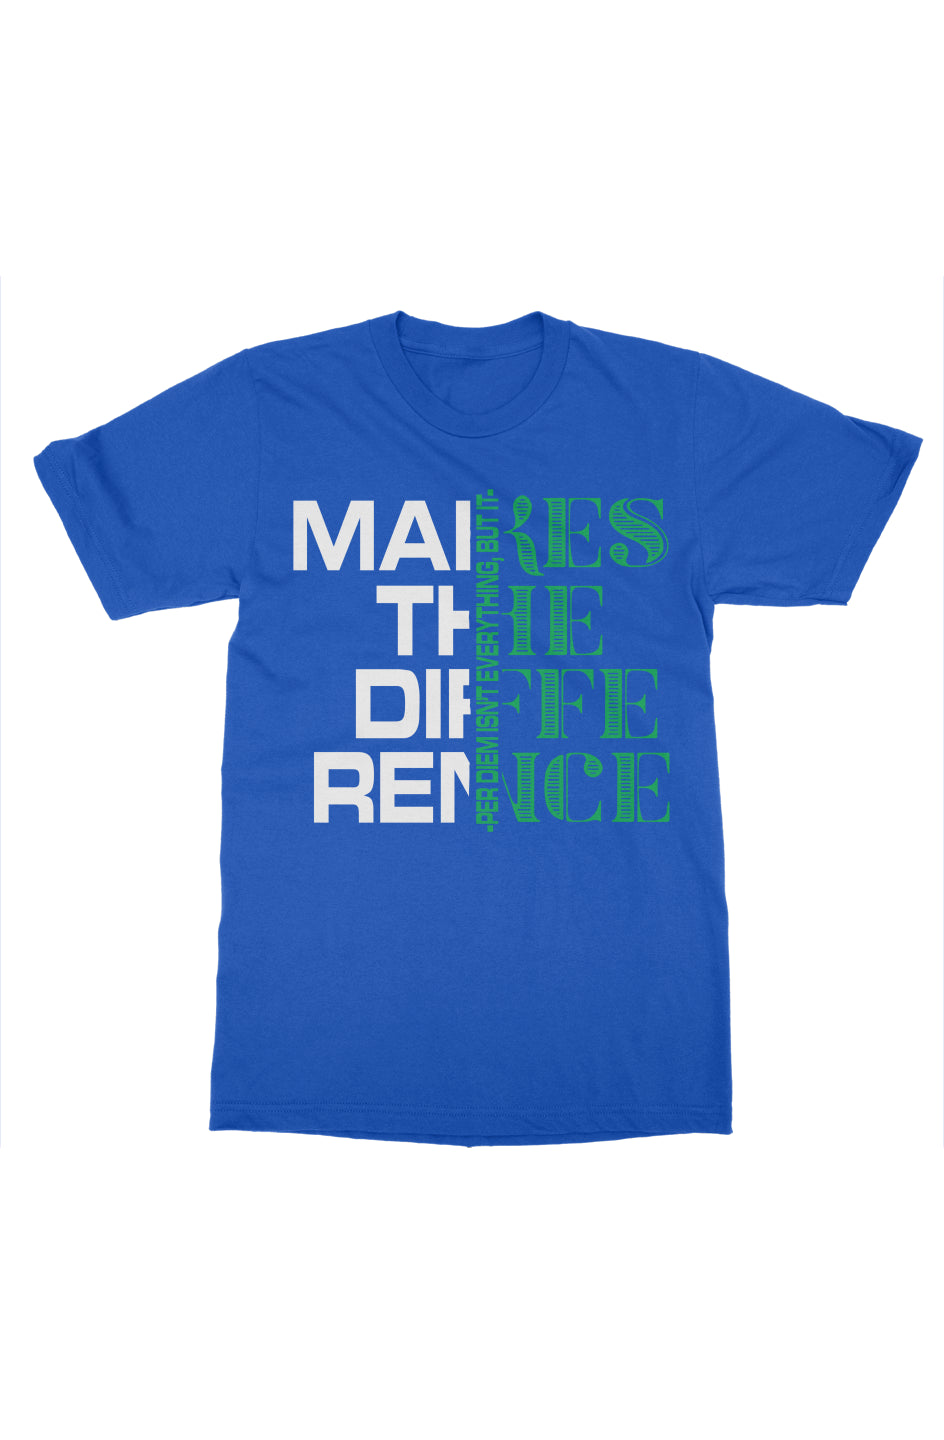 Per Diem Makes The Difference Tee- Royal Blue